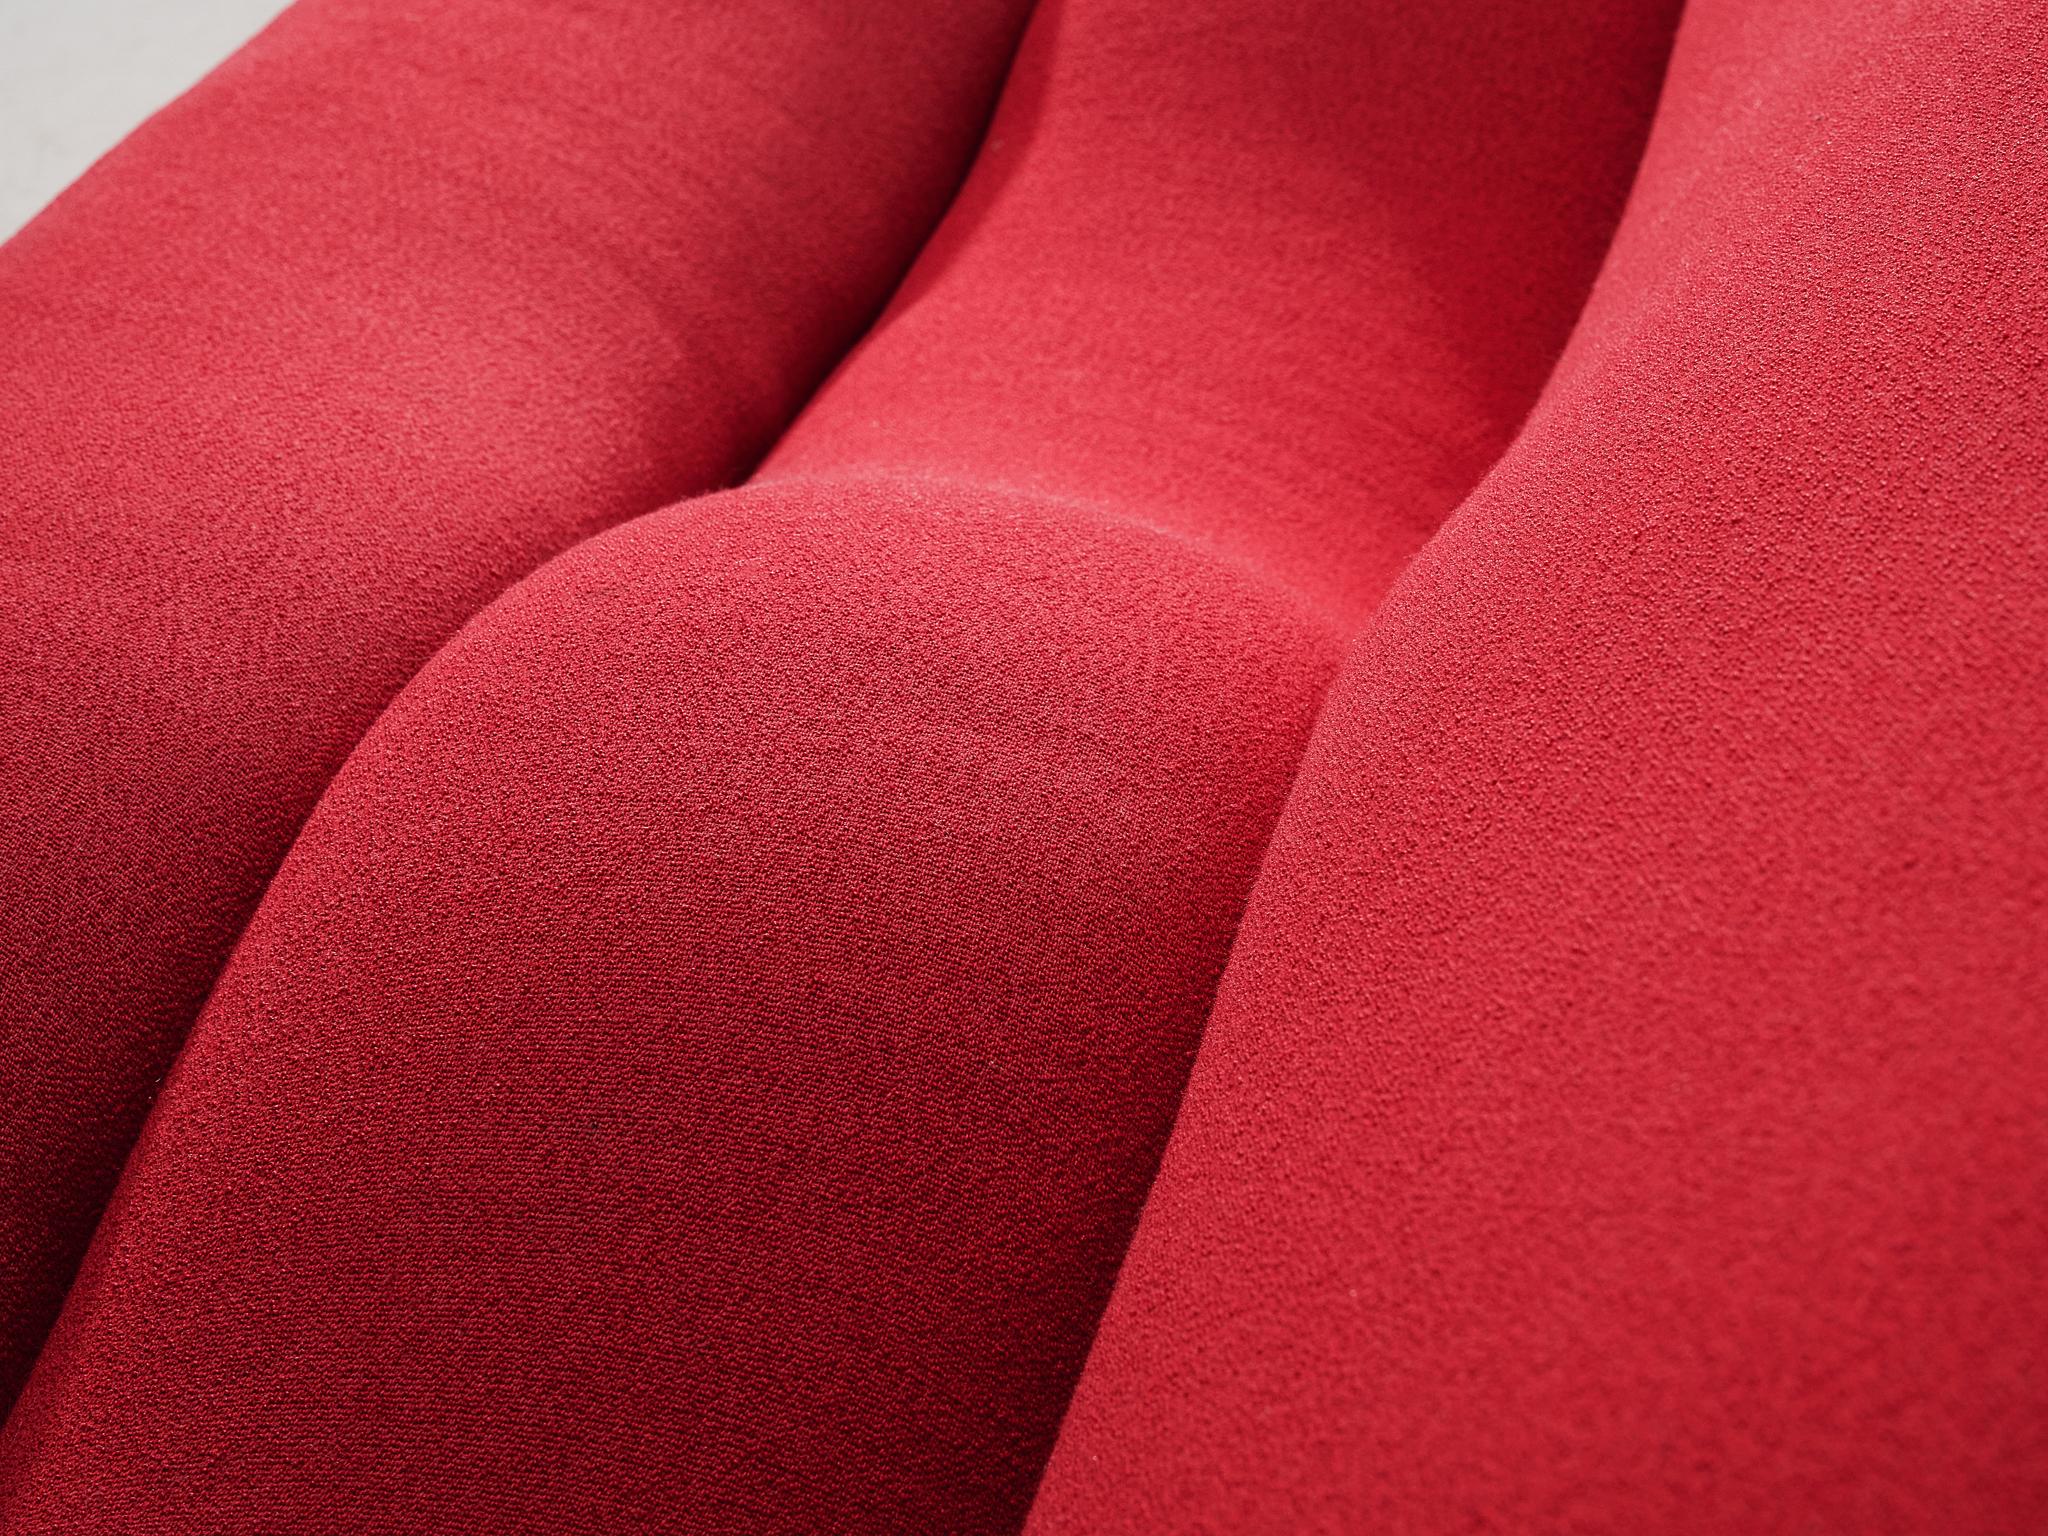 Mid-Century Modern Pierre Paulin for Artifort Three-seater 'ABCD' Sofa in Red Upholstery